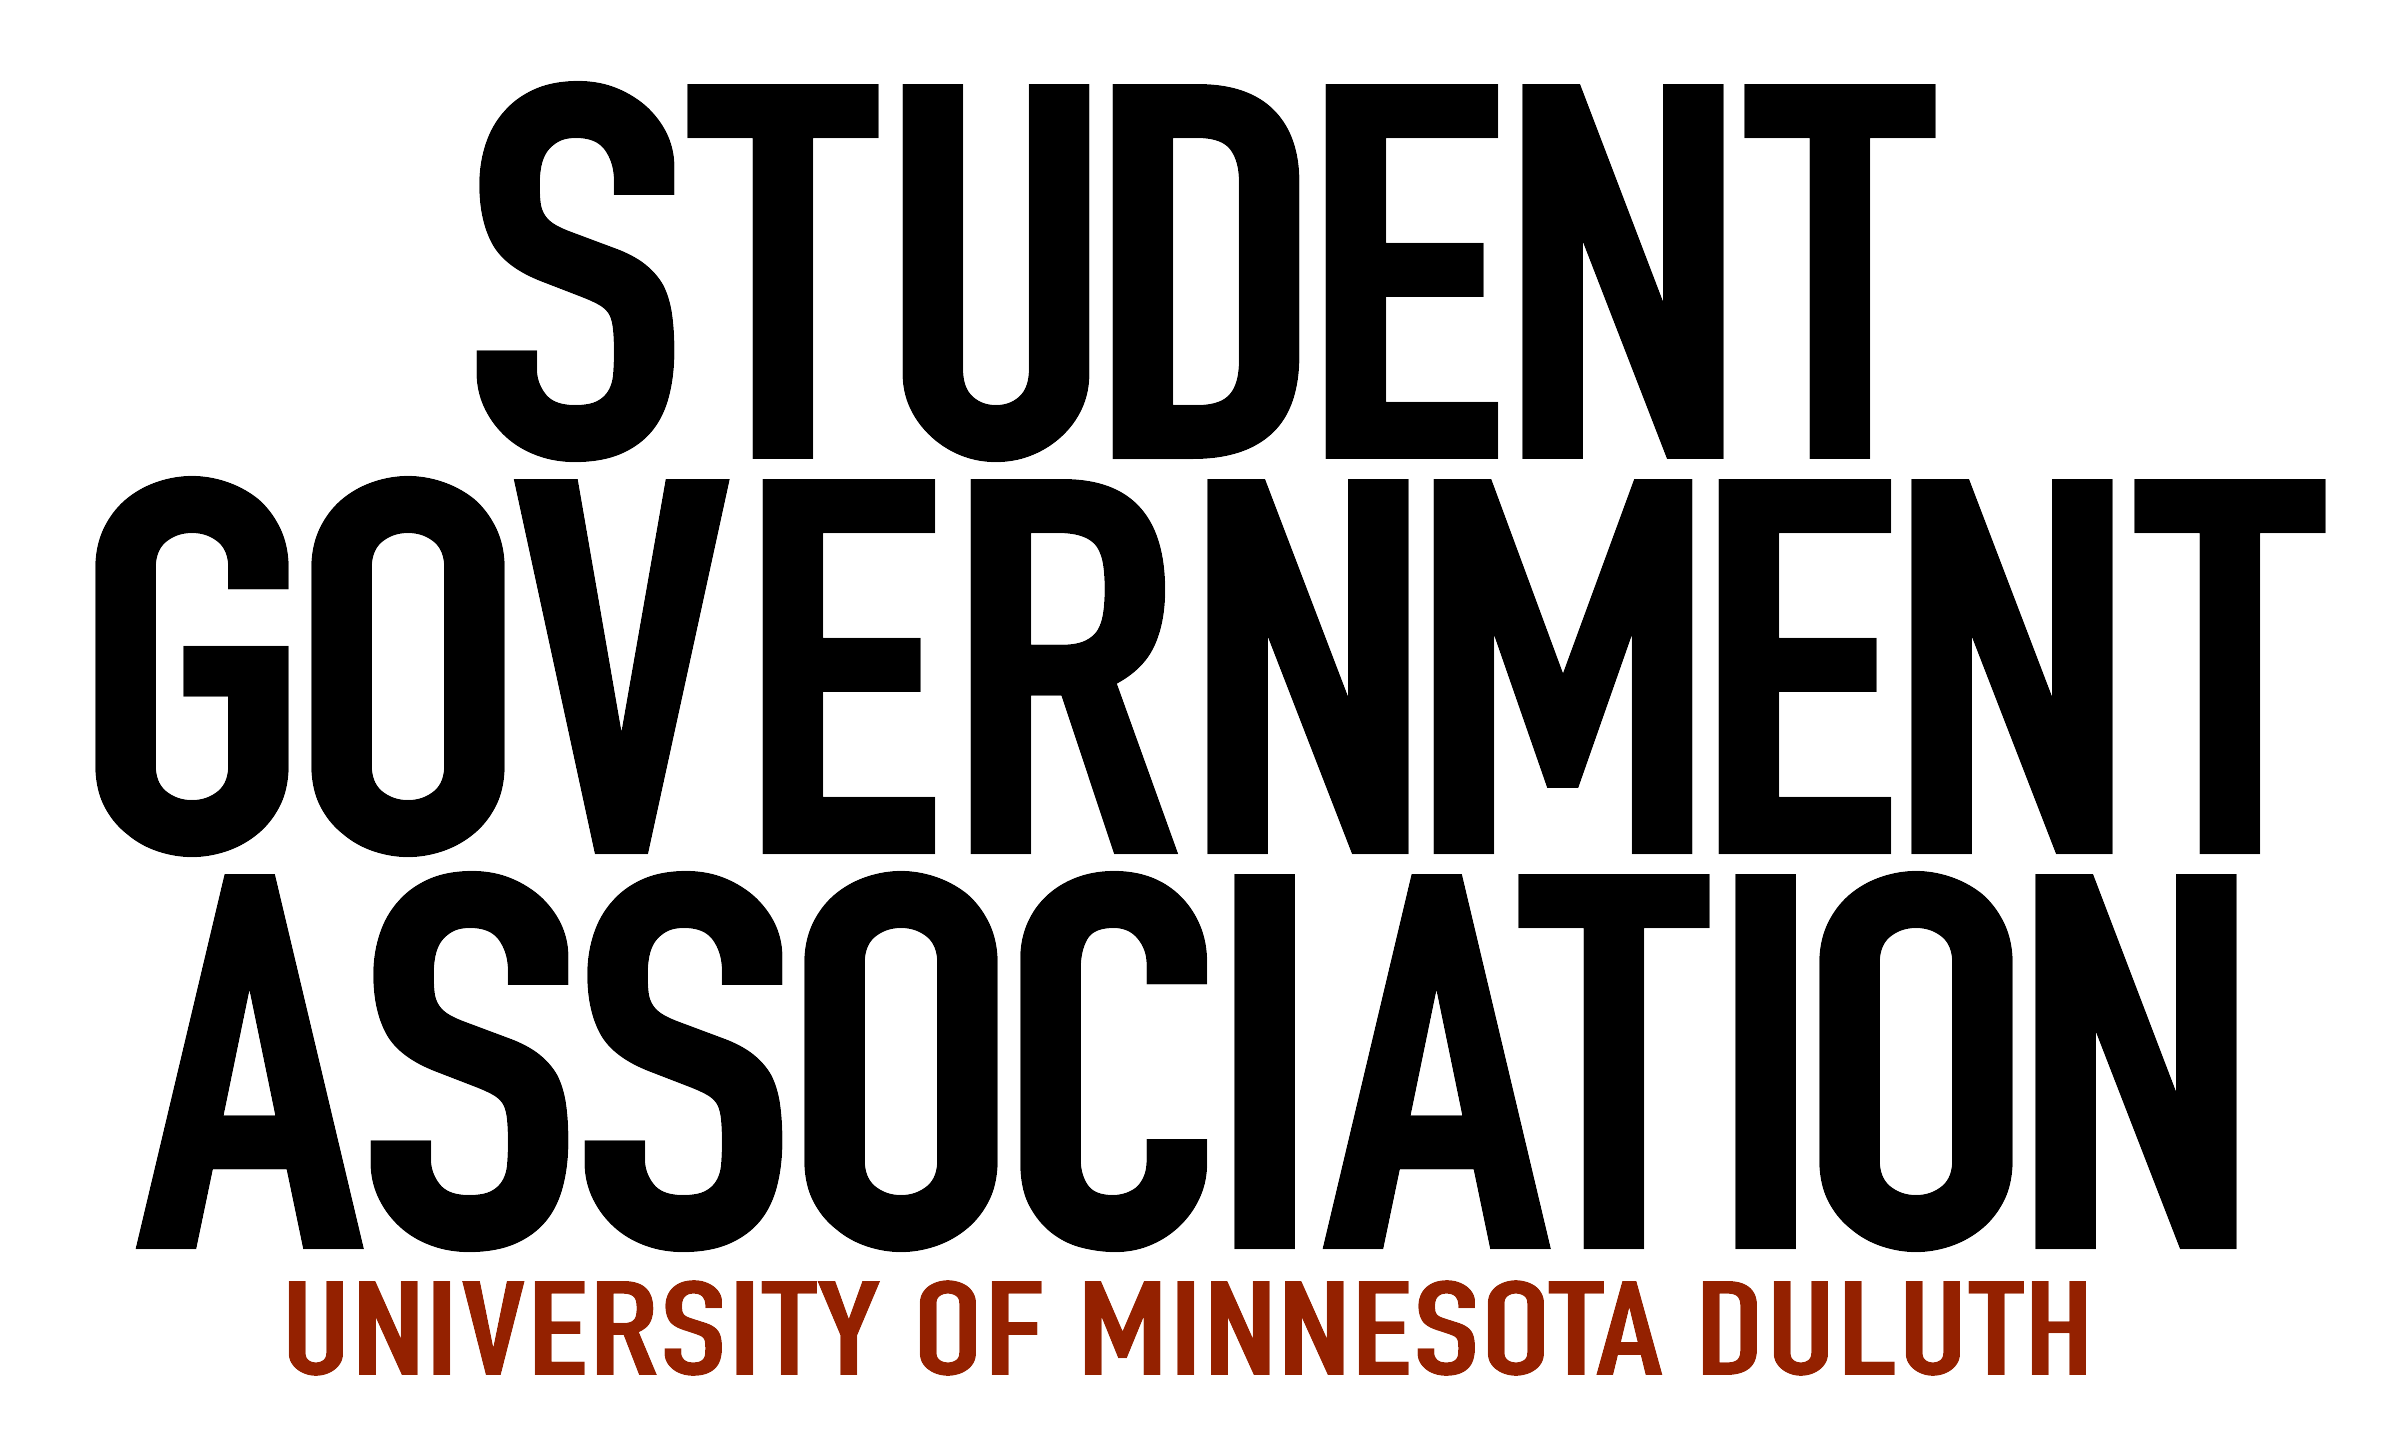 The Student Government Association Logo.